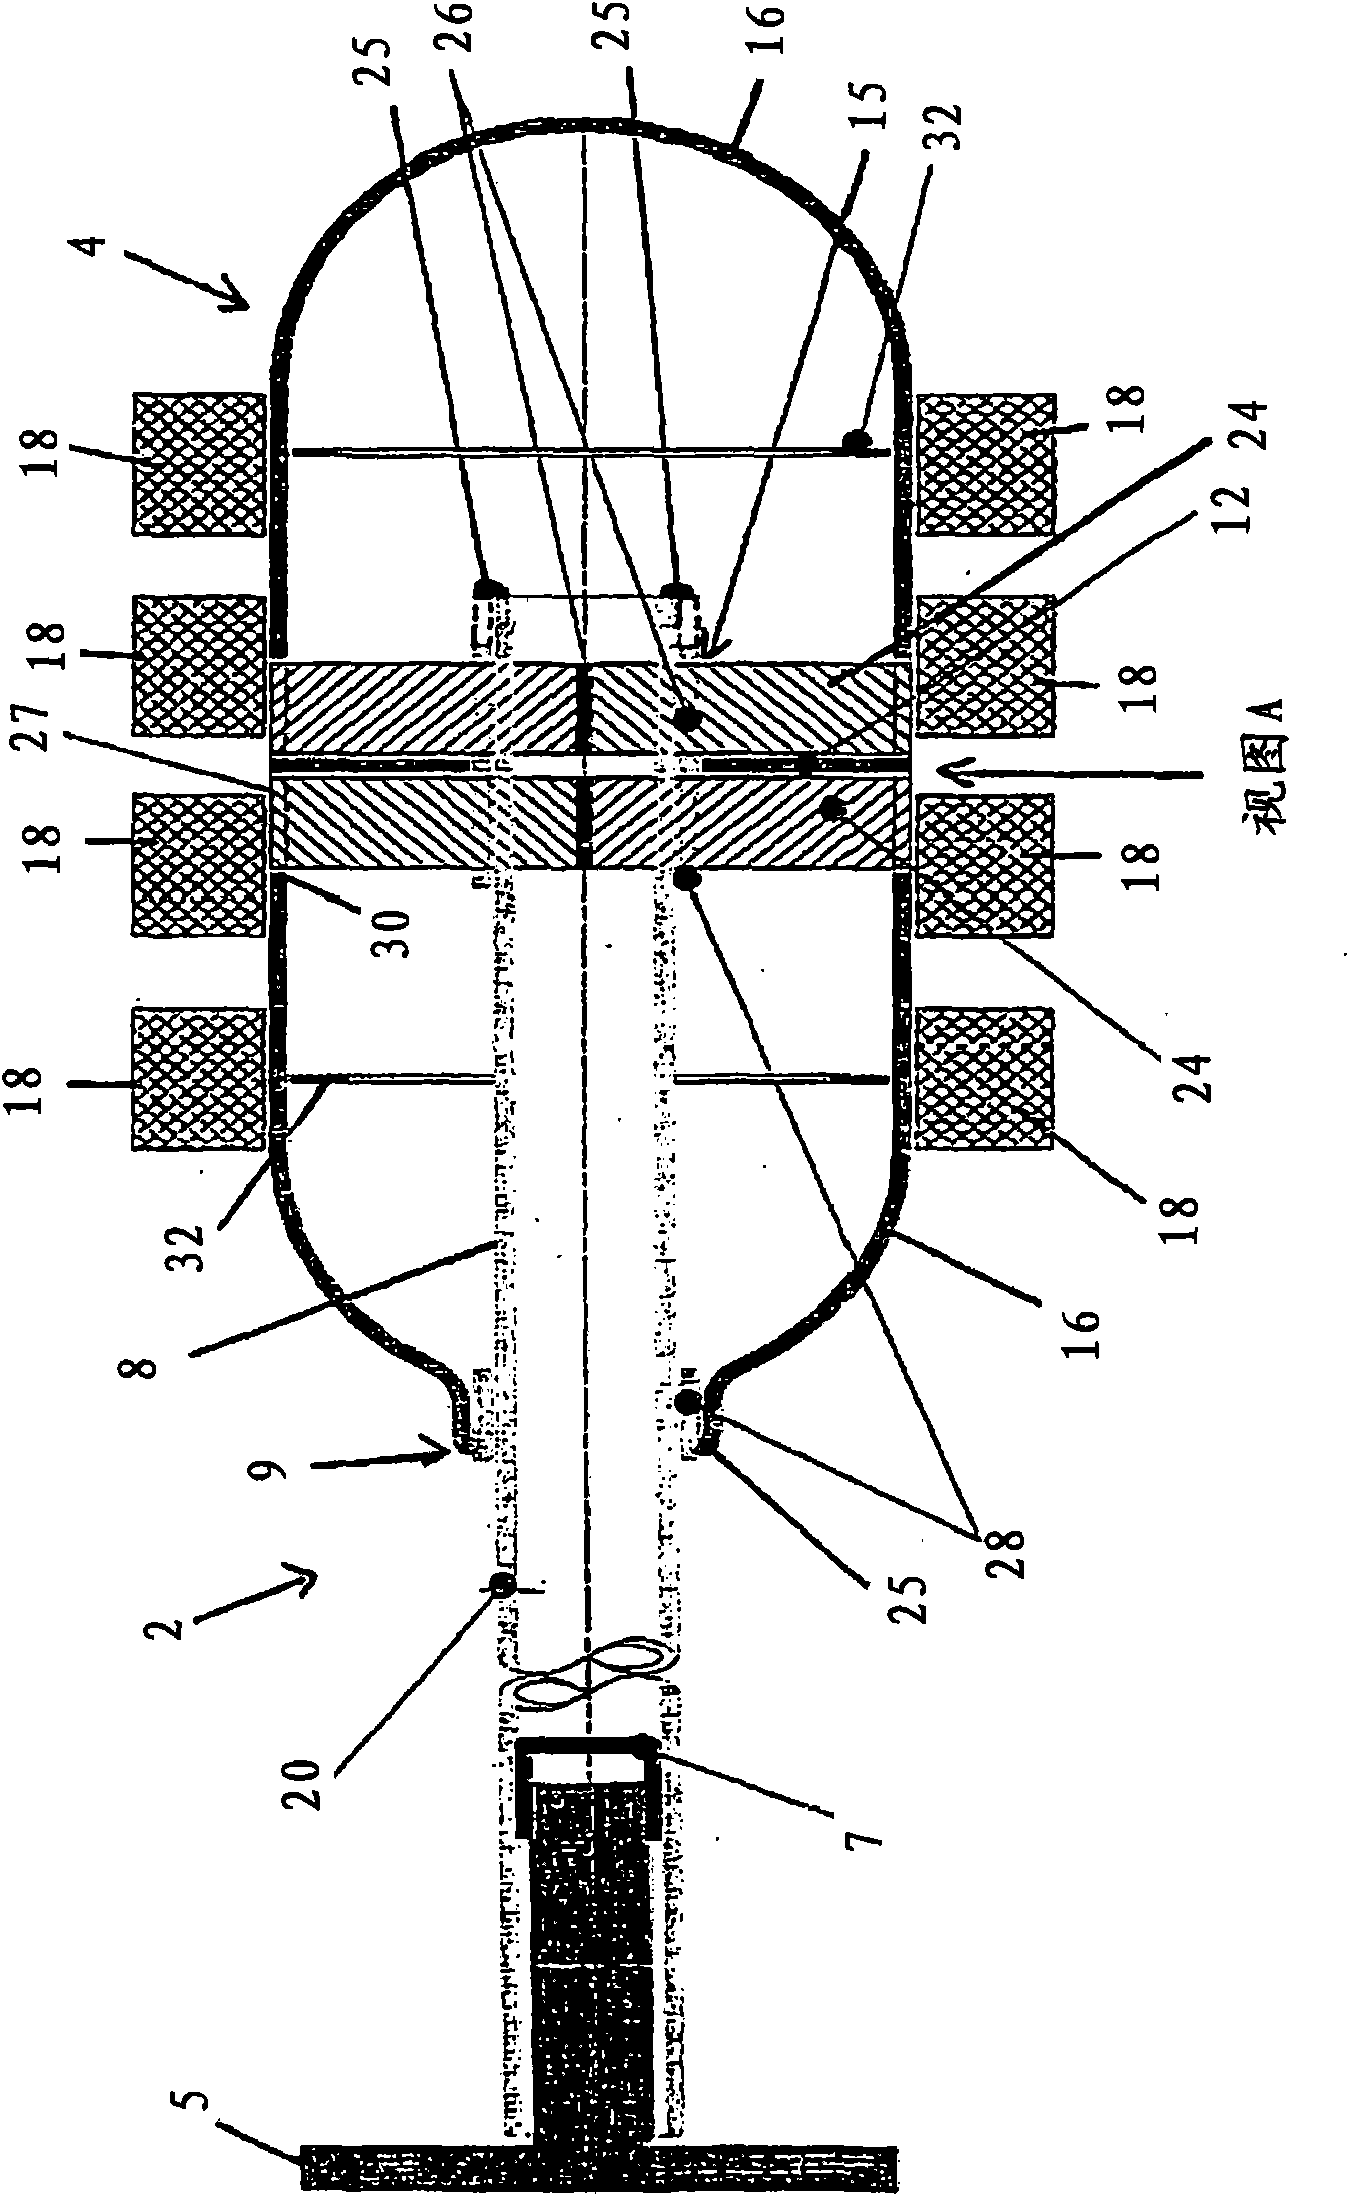 Apparatus and method for processing molten glass